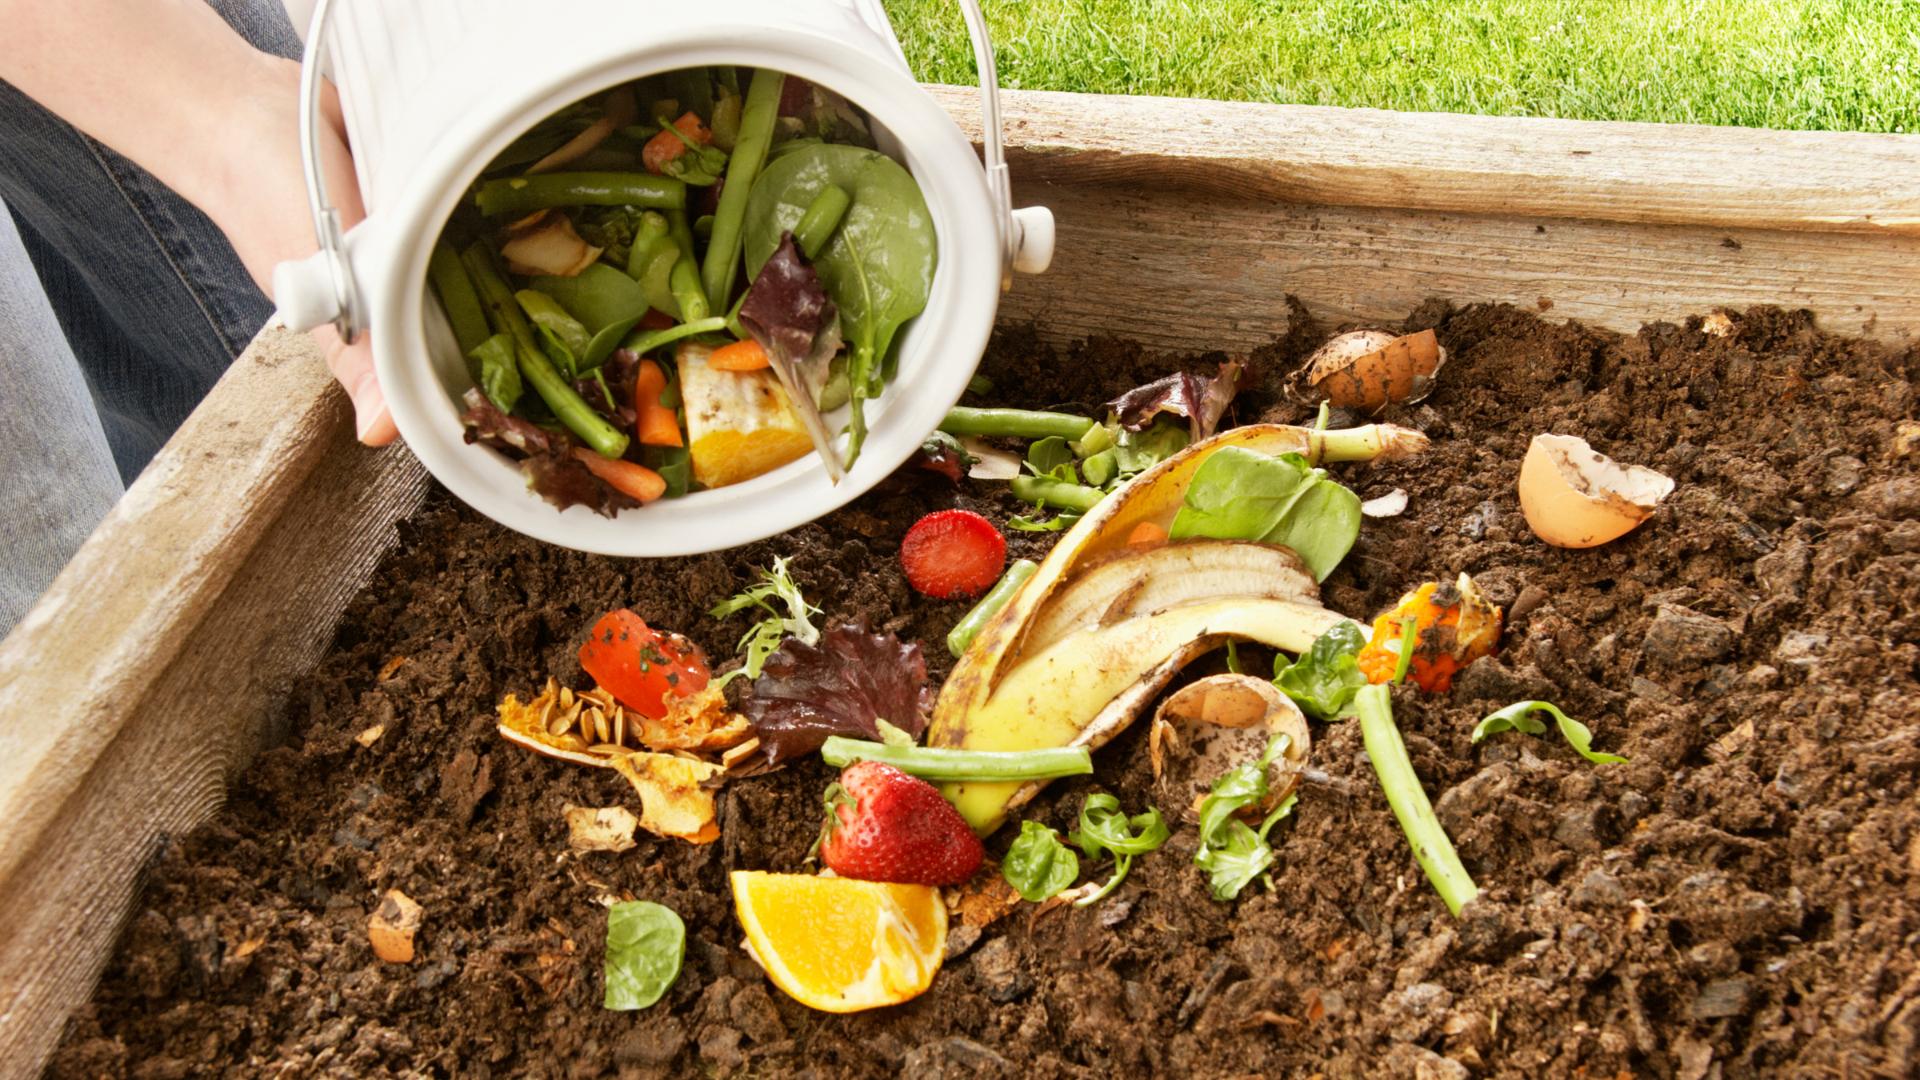 person throwing food scraps into composter